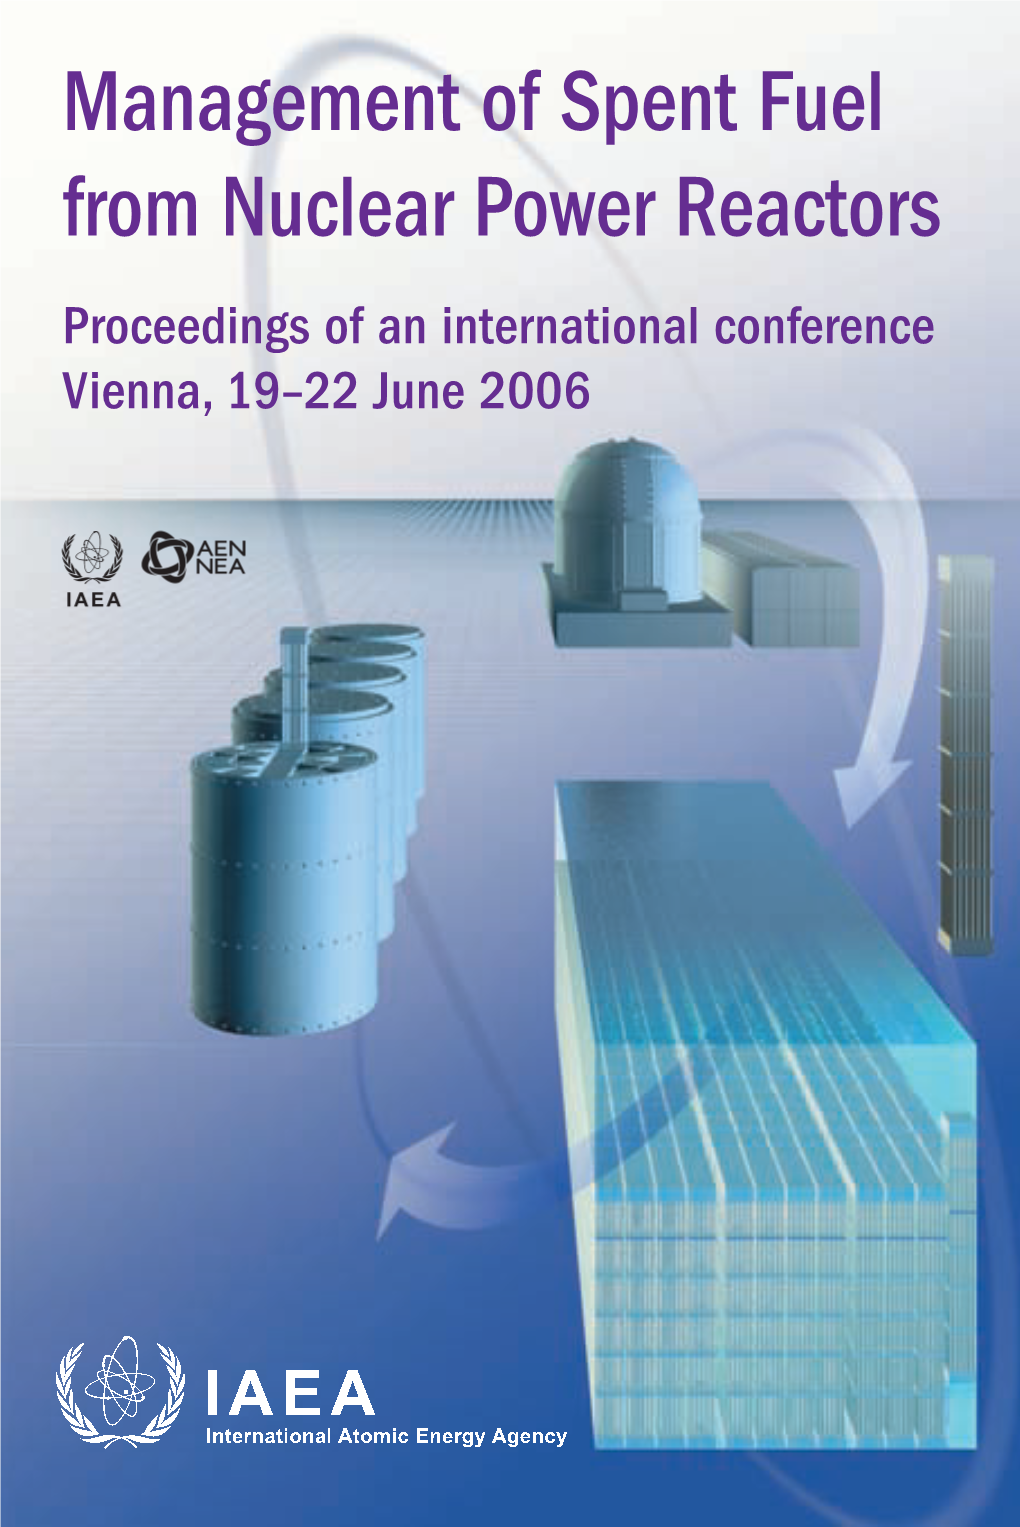 Management of Spent Fuel from Nuclear Power Reactors 0ROCEEDINGS�OF�AN�INTERNATIONAL�CONFERENCE 6IENNA �N�*UNE� IAEA SAFETY RELATED PUBLICATIONS